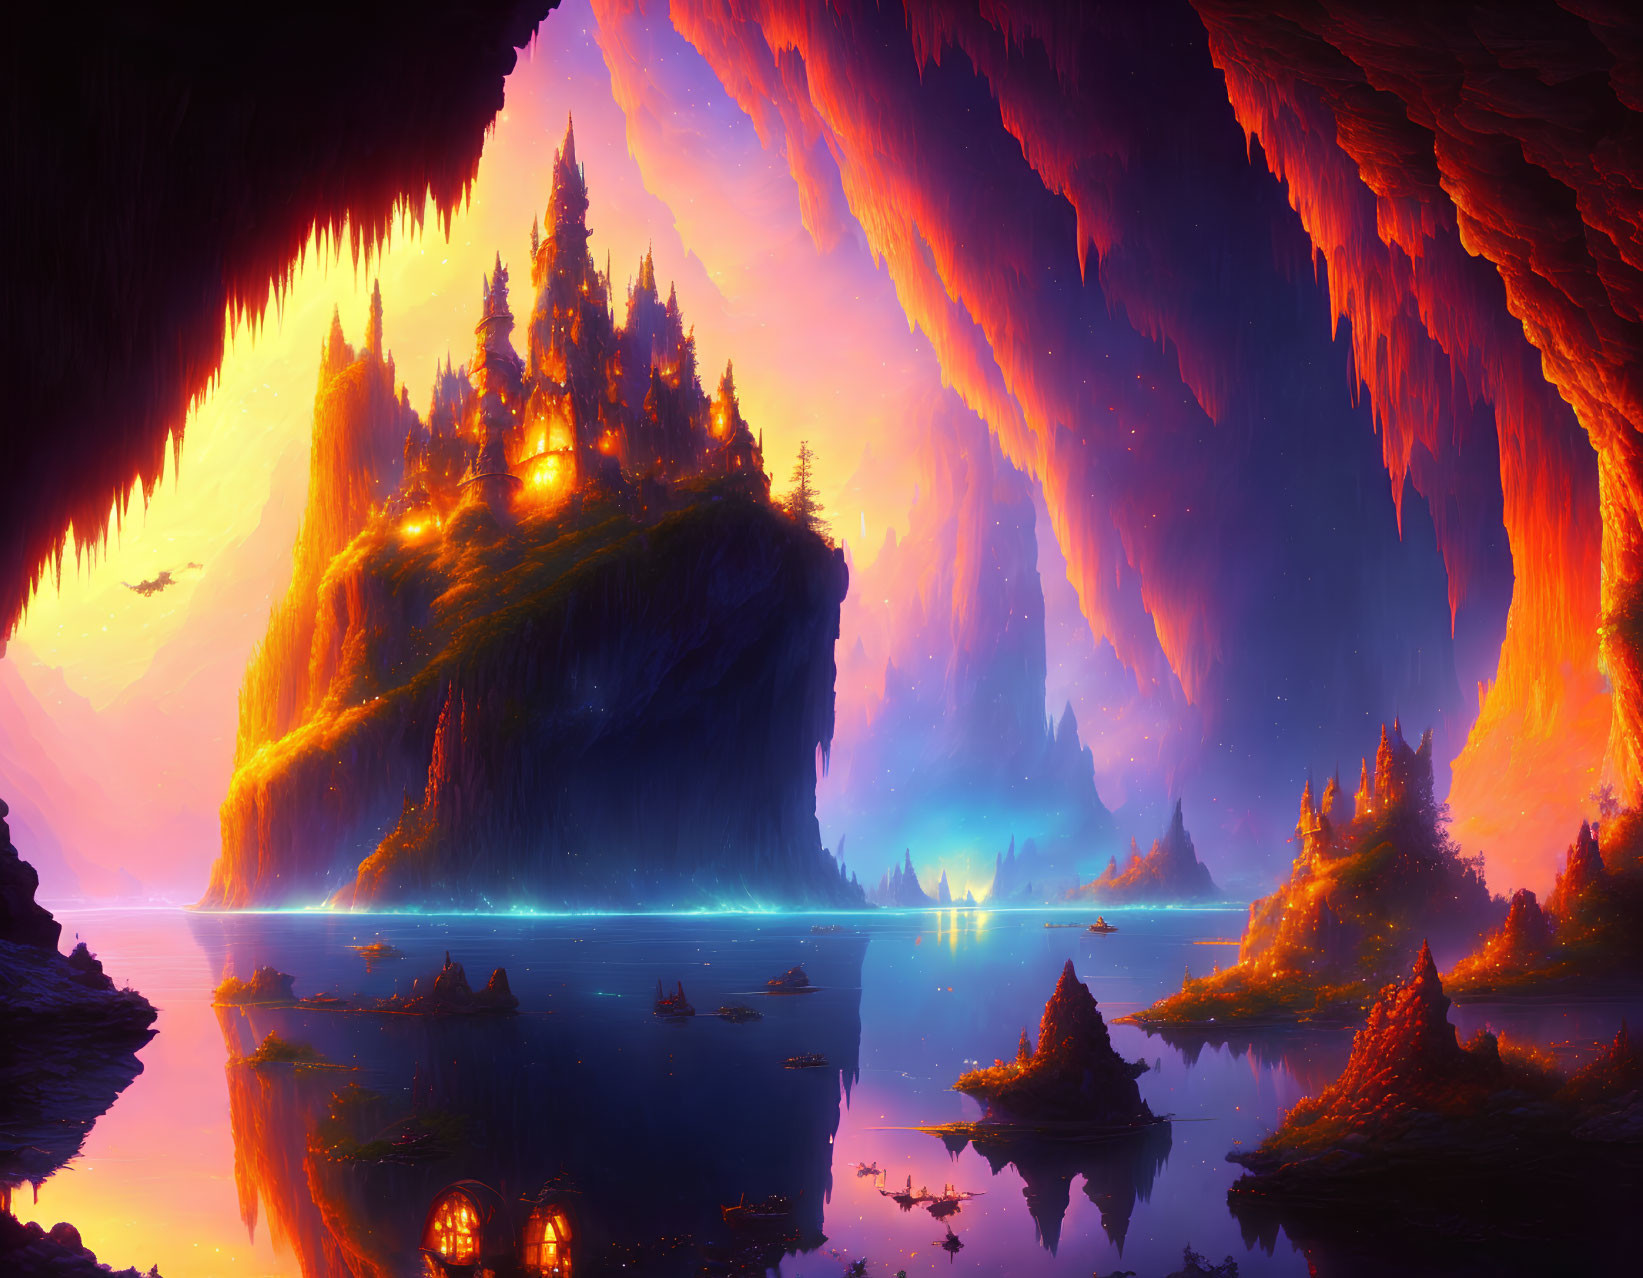 Fantasy landscape with glowing island and blue waters